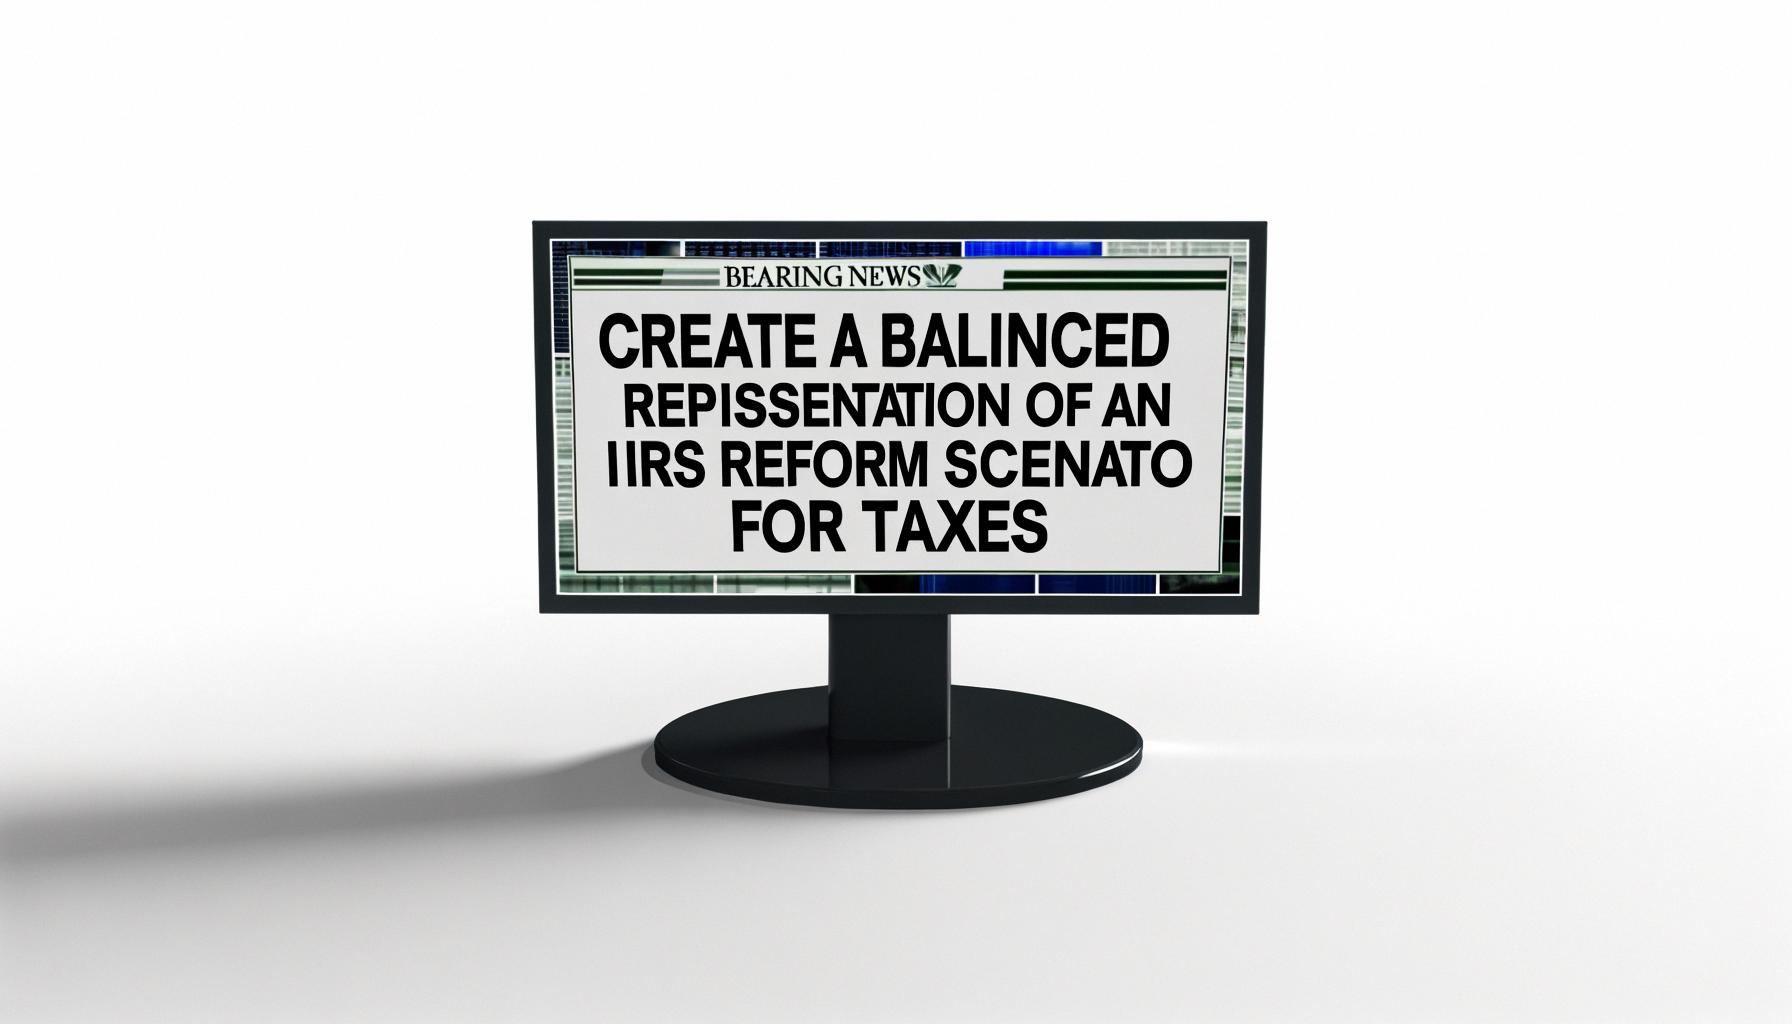 IRS reform for efficient tax system Balanced News